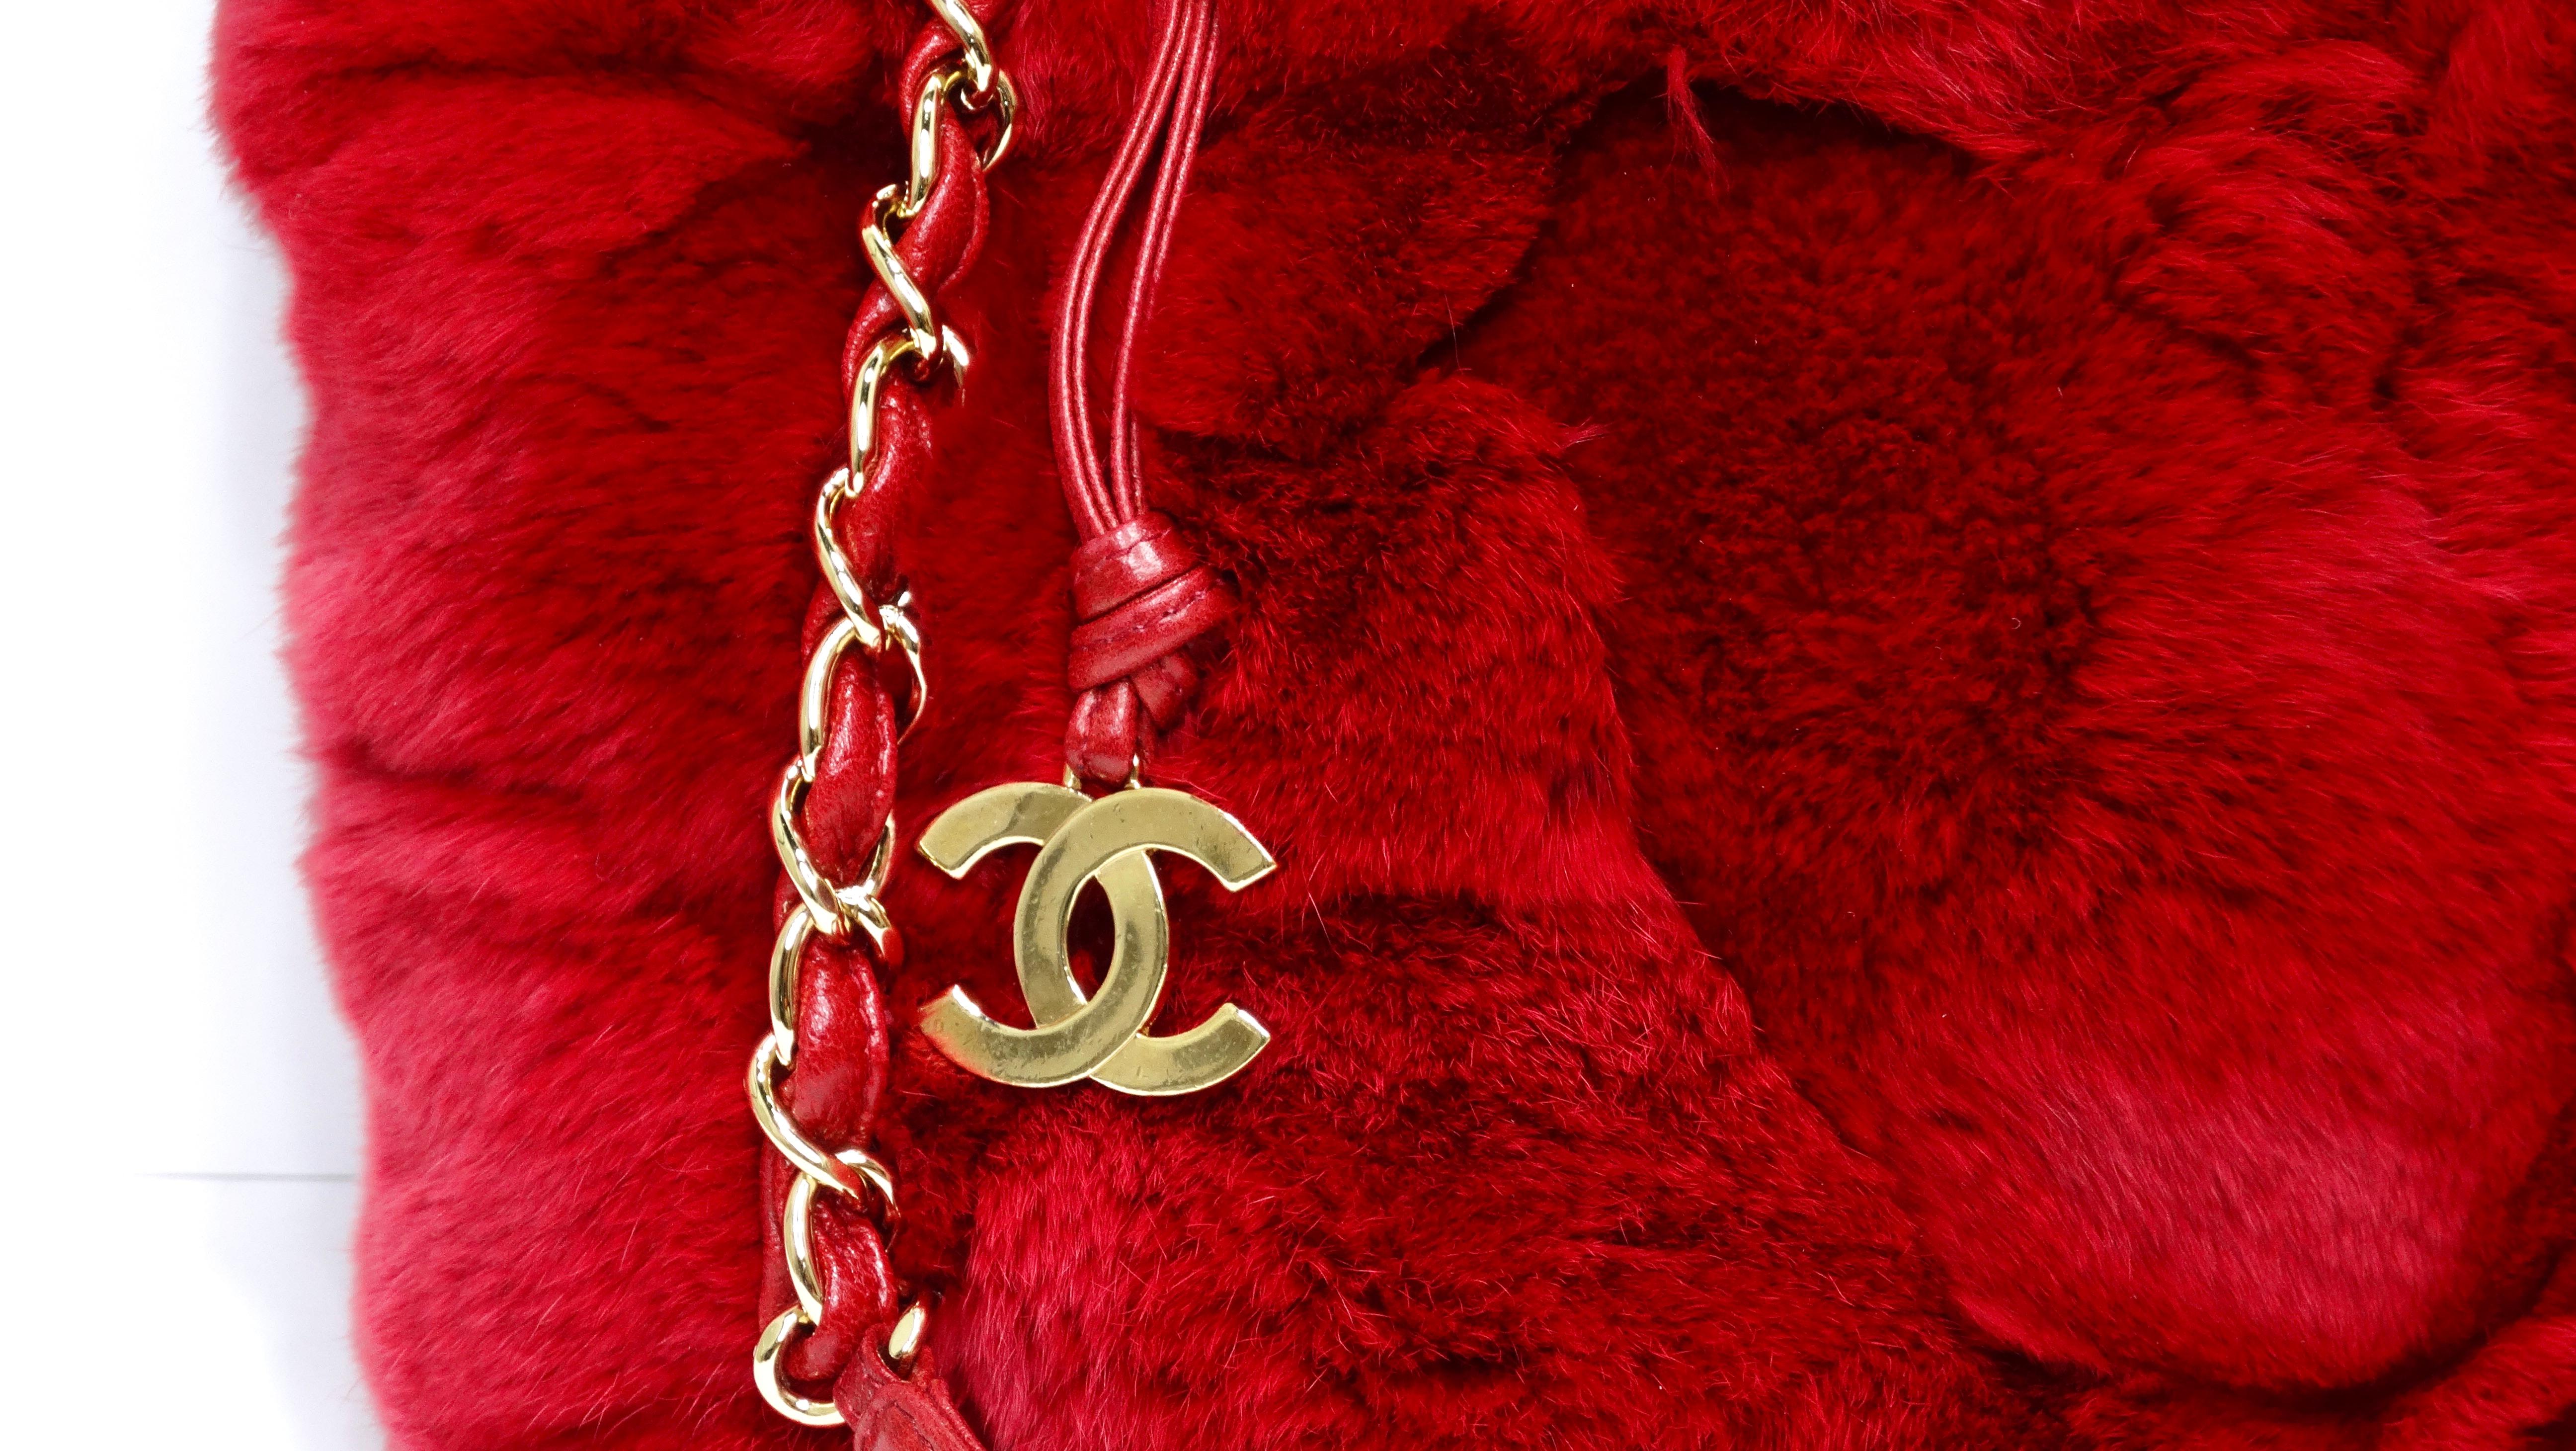 Snag this ultra rare and coveted Chanel handbag today! Don't miss out on the chance to get this gem! This is featured in striking and bright red dyed rabbit fur exterior that is in exceptional condition. This has a small tote silhouette, a leather